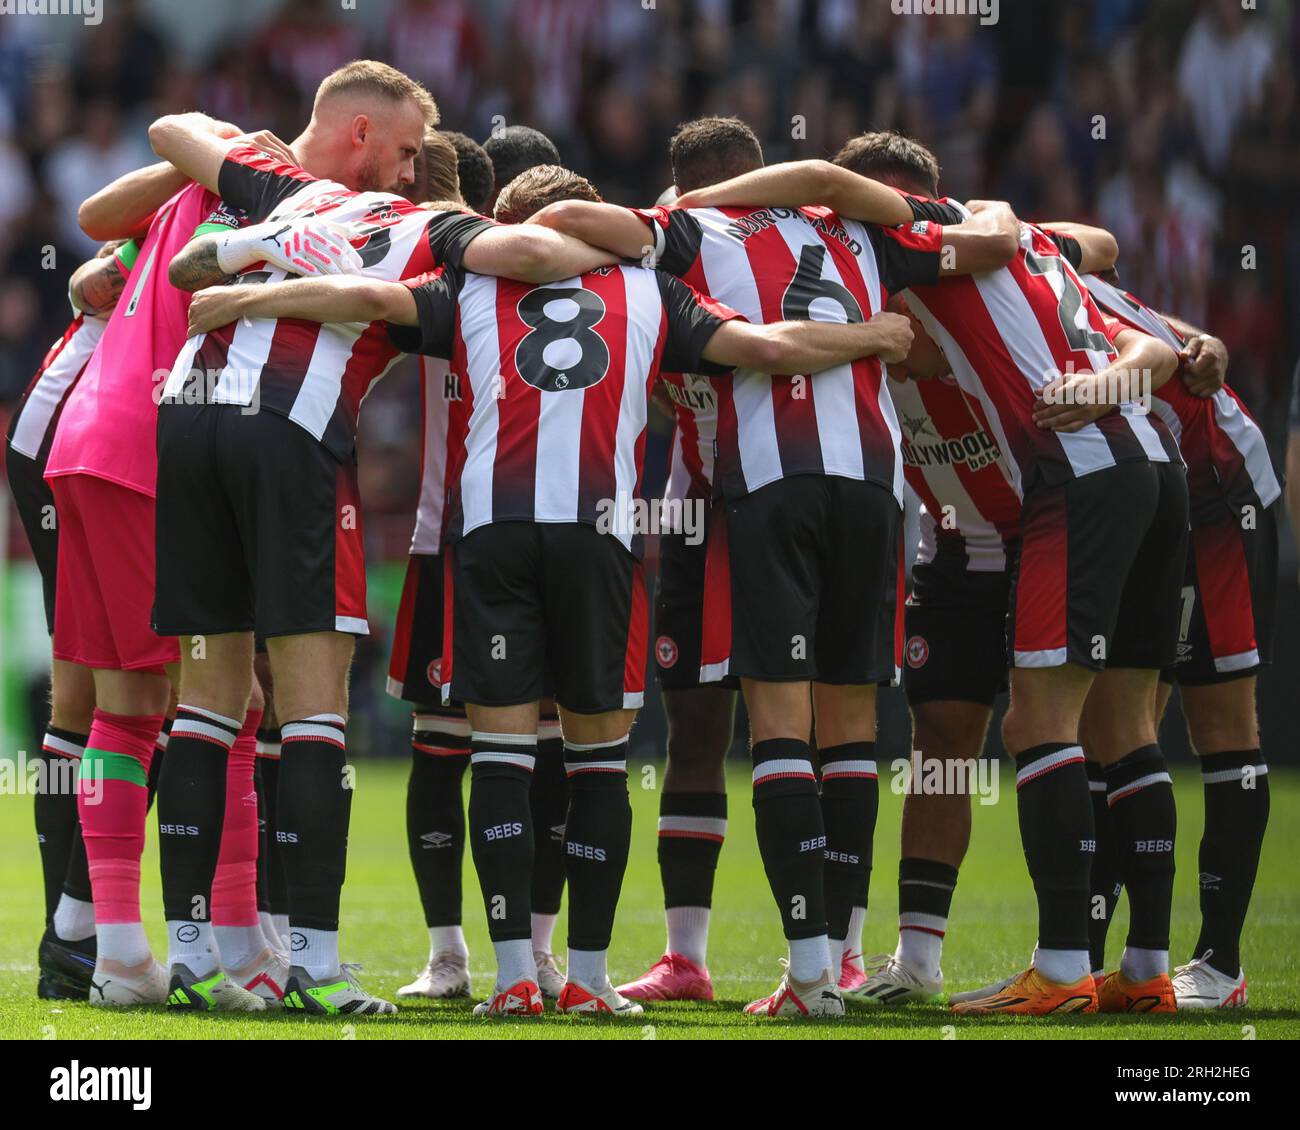 Brentford have a team huddle ahead of kickoff during the Premier League match Brentford vs Tottenham Hotspur at Brentford Community Stadium, London, United Kingdom, 13th August 2023  (Photo by Mark Cosgrove/News Images) Stock Photo